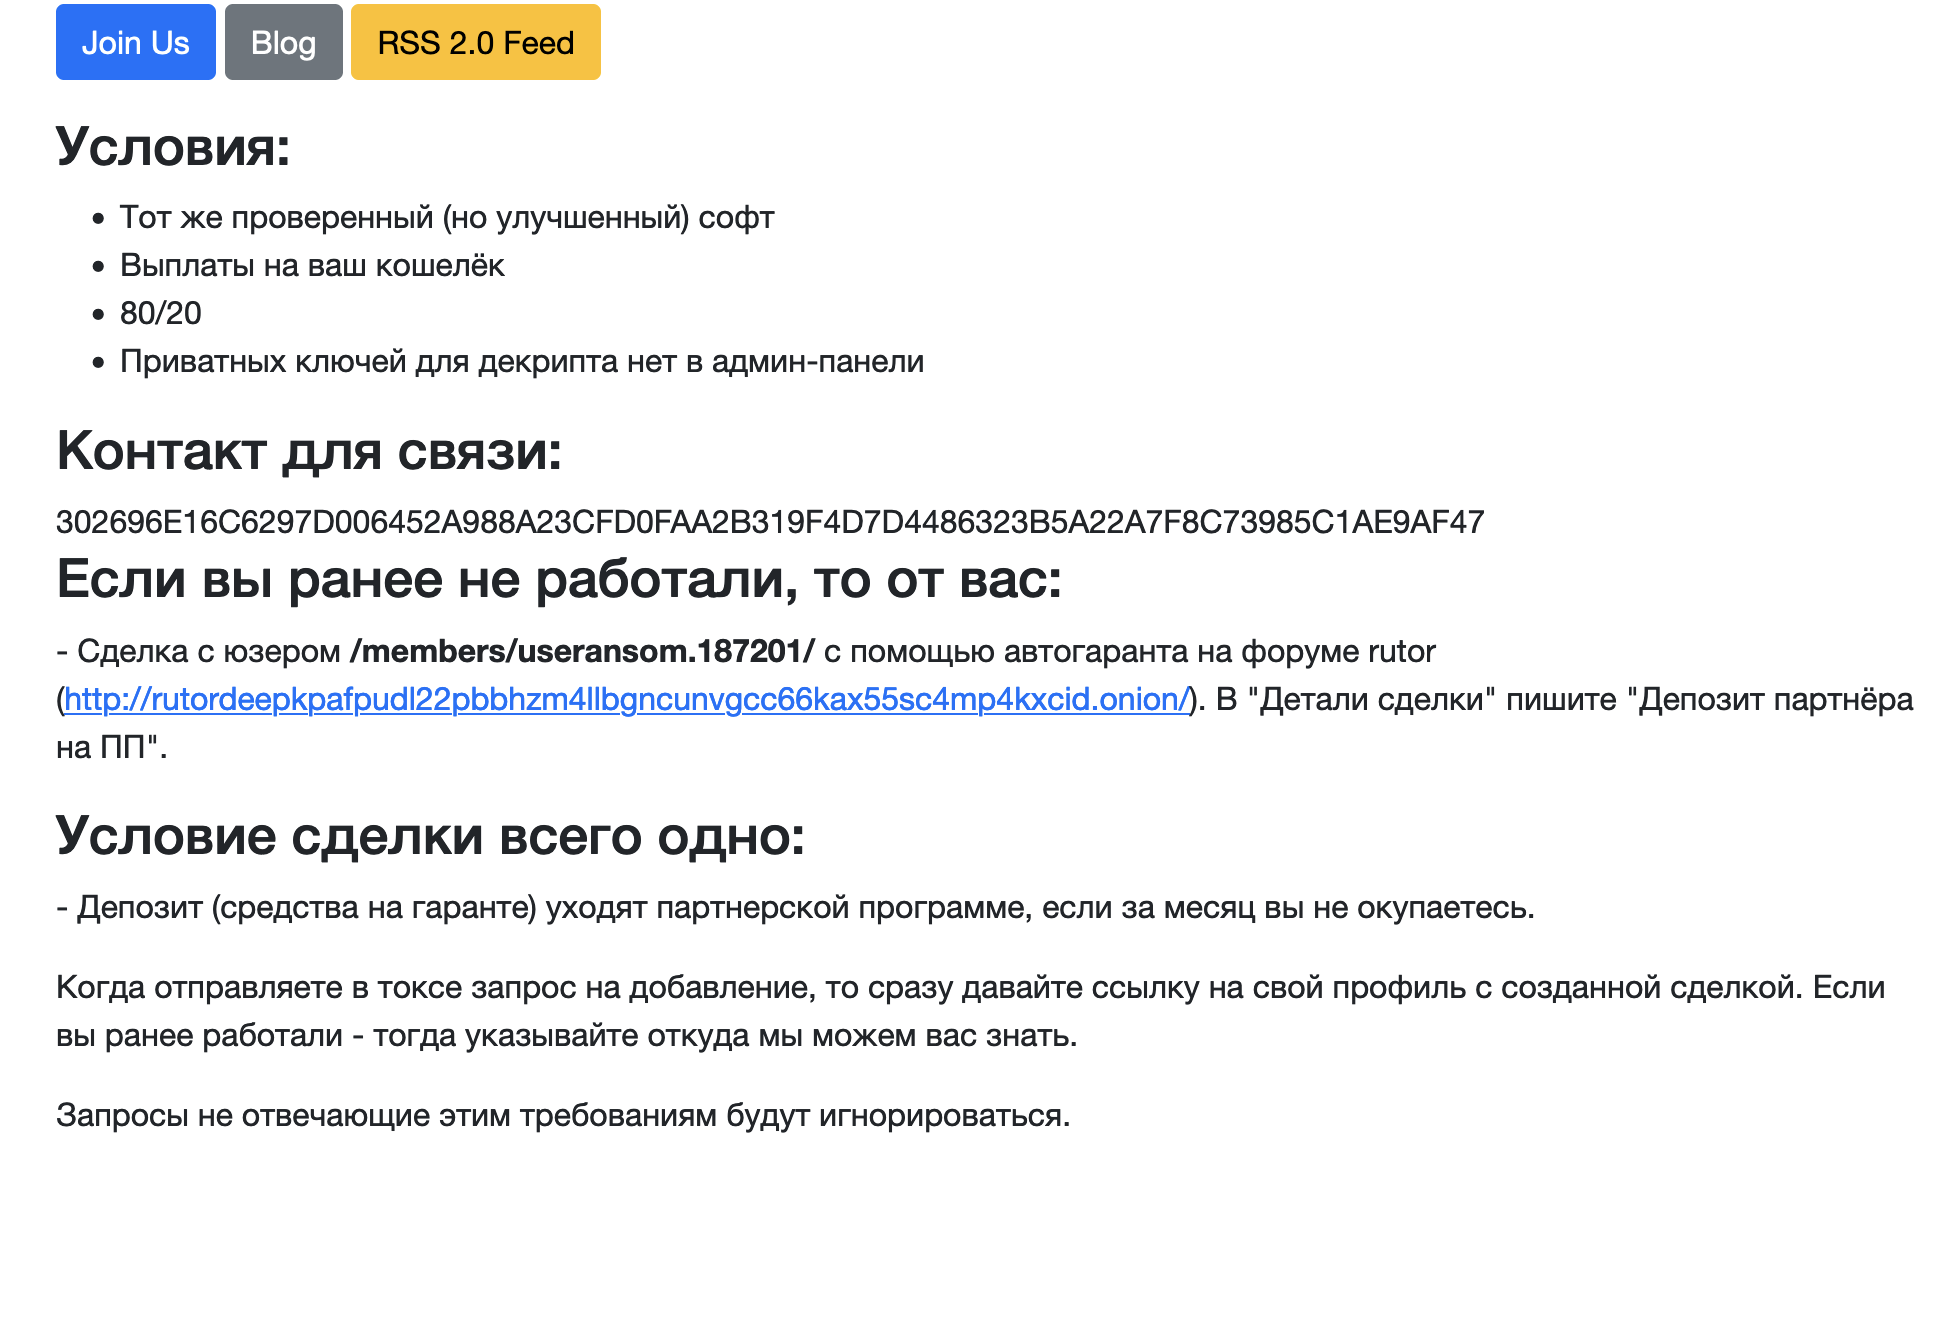 Recruitment section of the new leak site. Russian-language posts originally directed would-be members to RuTOR.